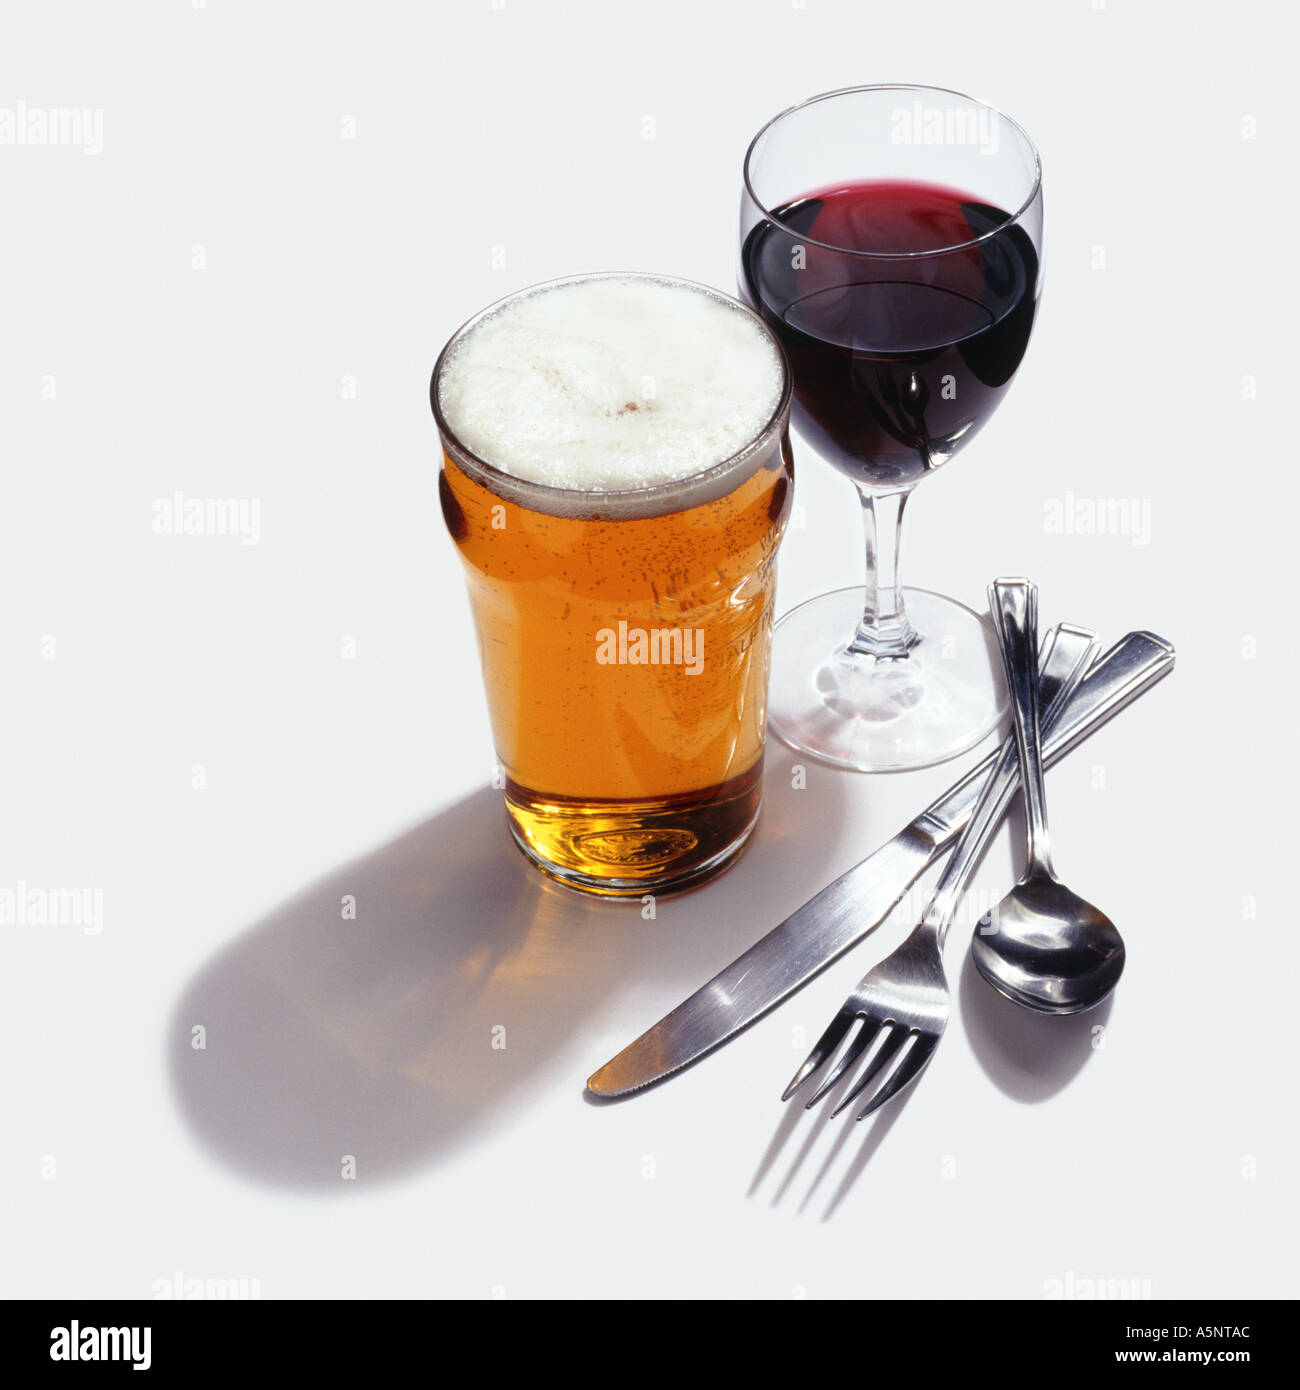 A glass of wine beer knife folk and spoon Stock Photo